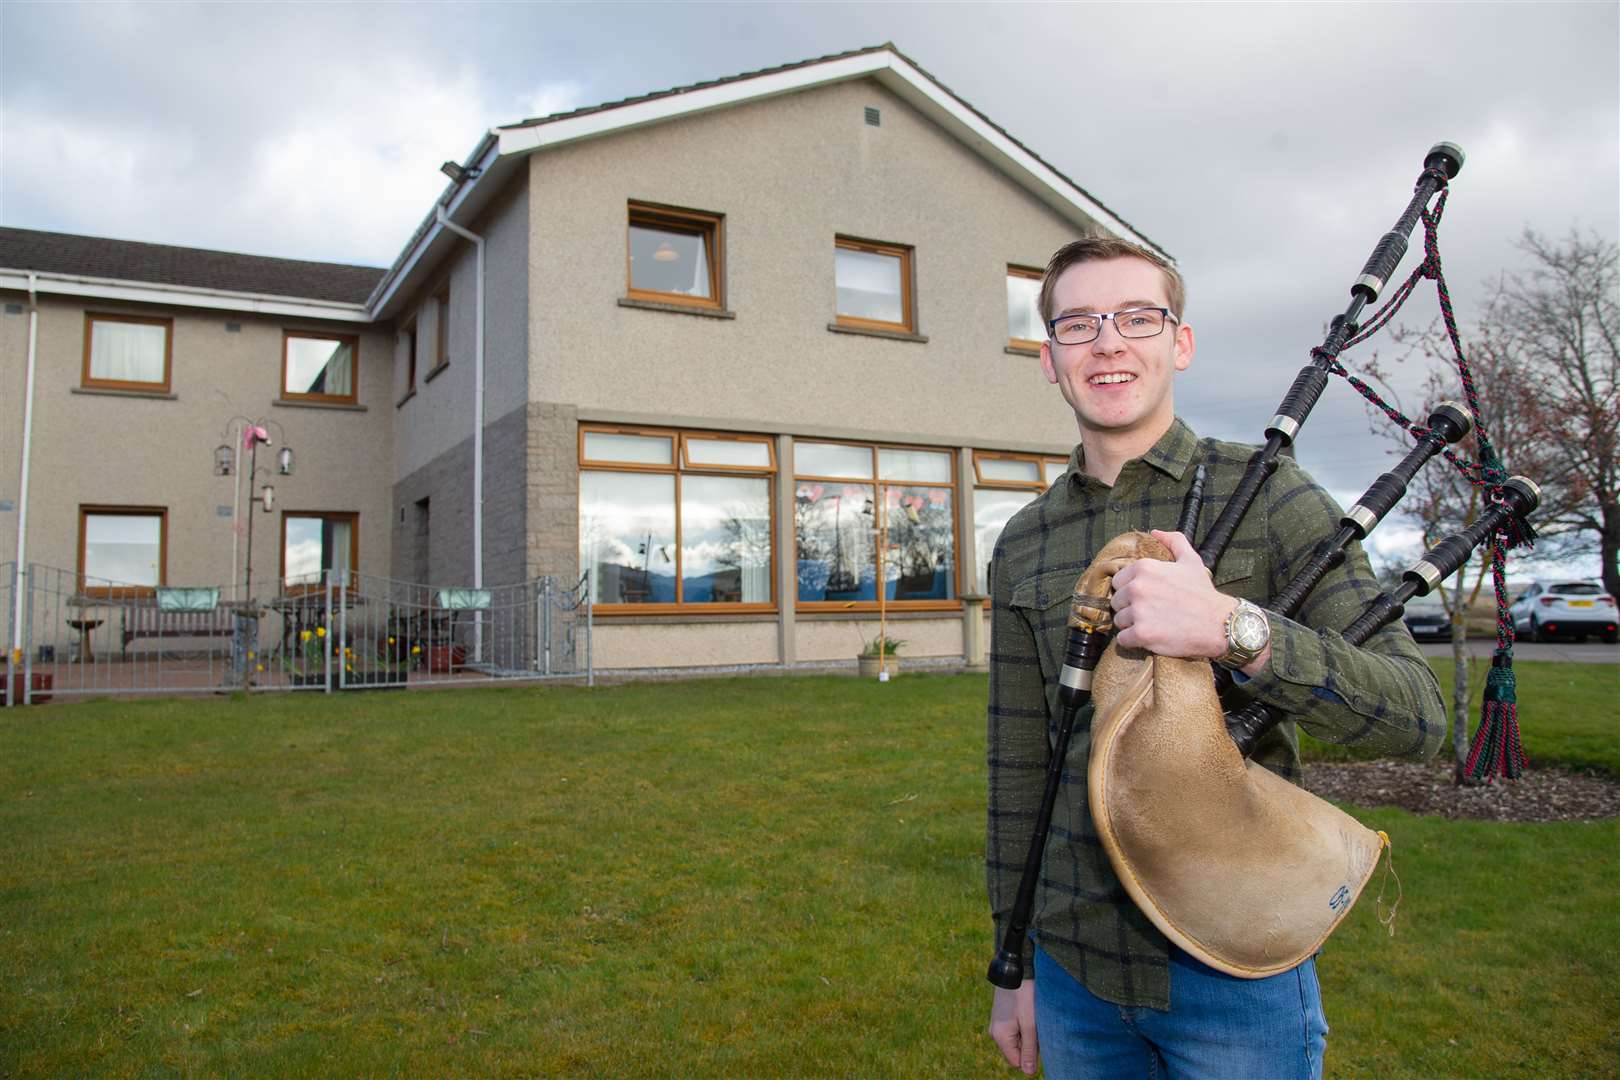 Keith Piper Ewen Brindle has been piping outside the Glenisla Care Home in Keith for the residents during the coronavirus pandemic. ..Picture: Daniel Forsyth..